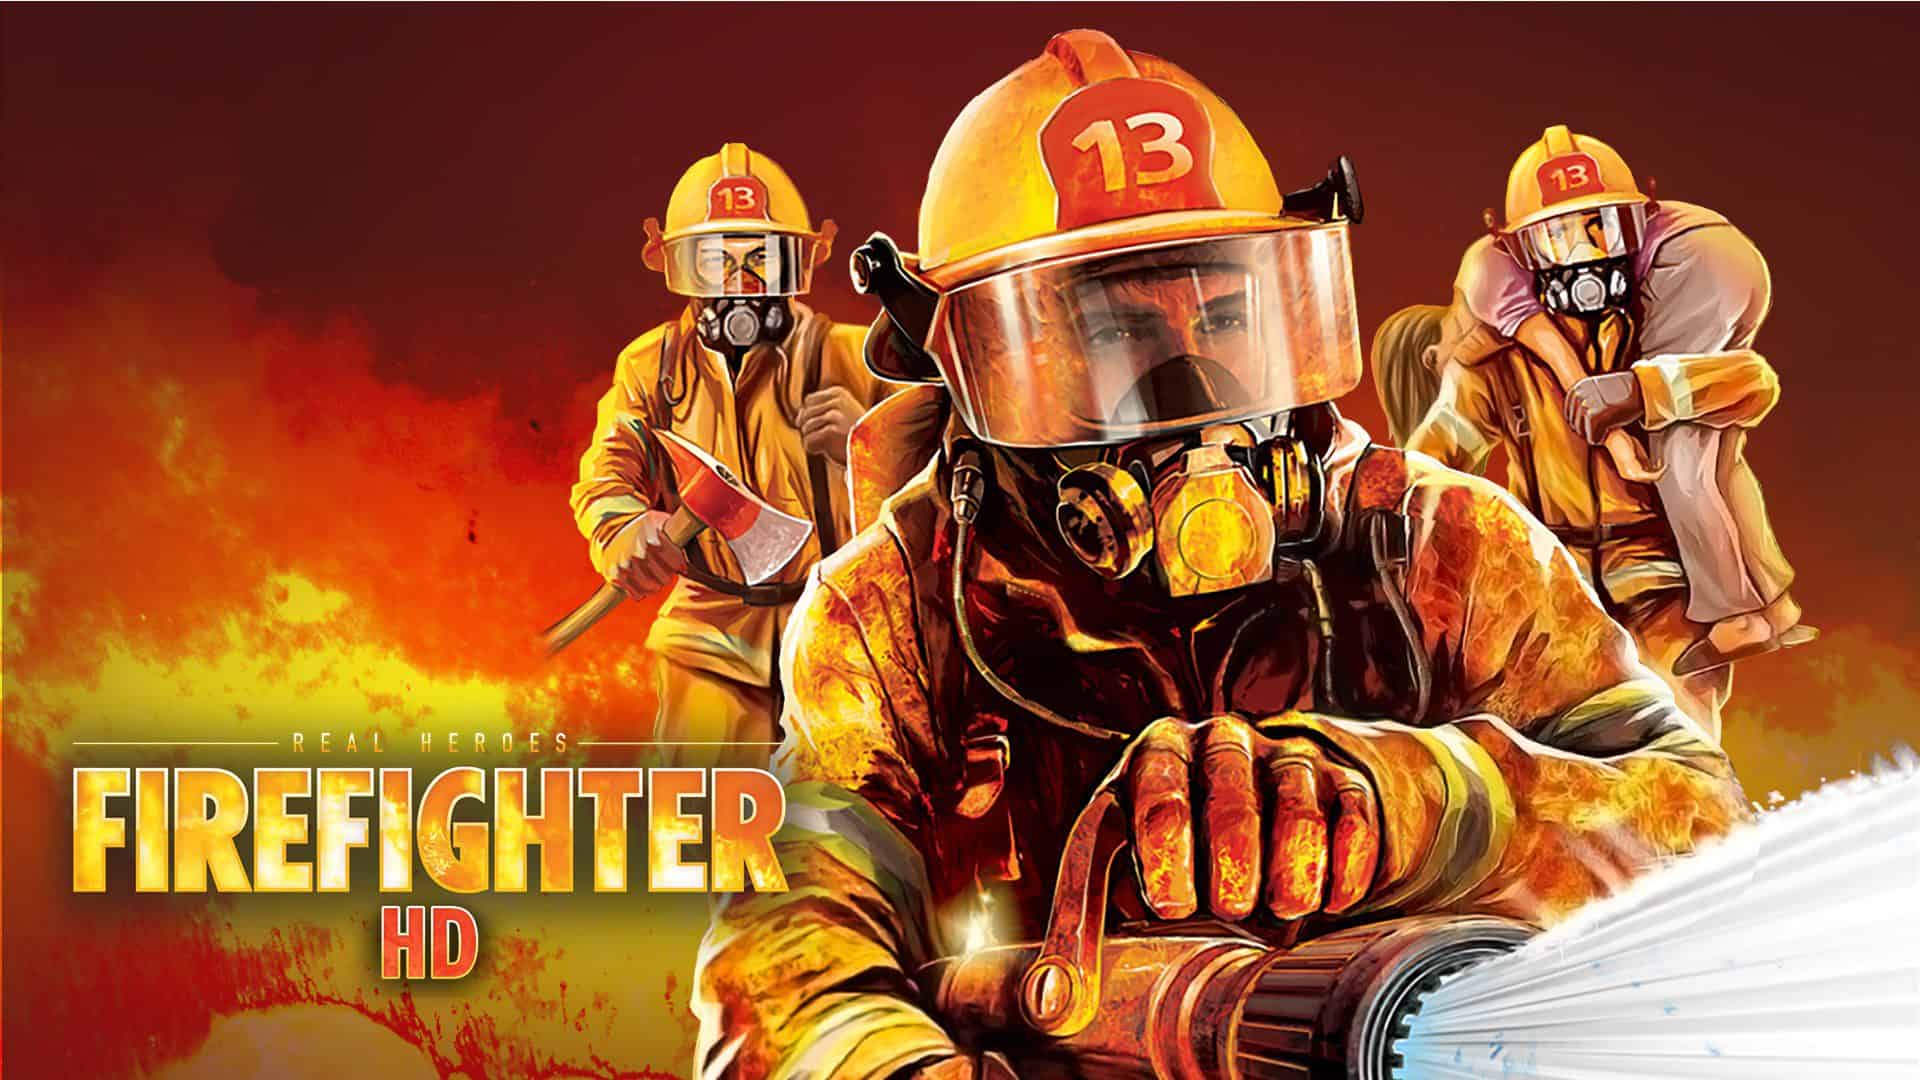 Real Heroes: Firefighter HD game poster